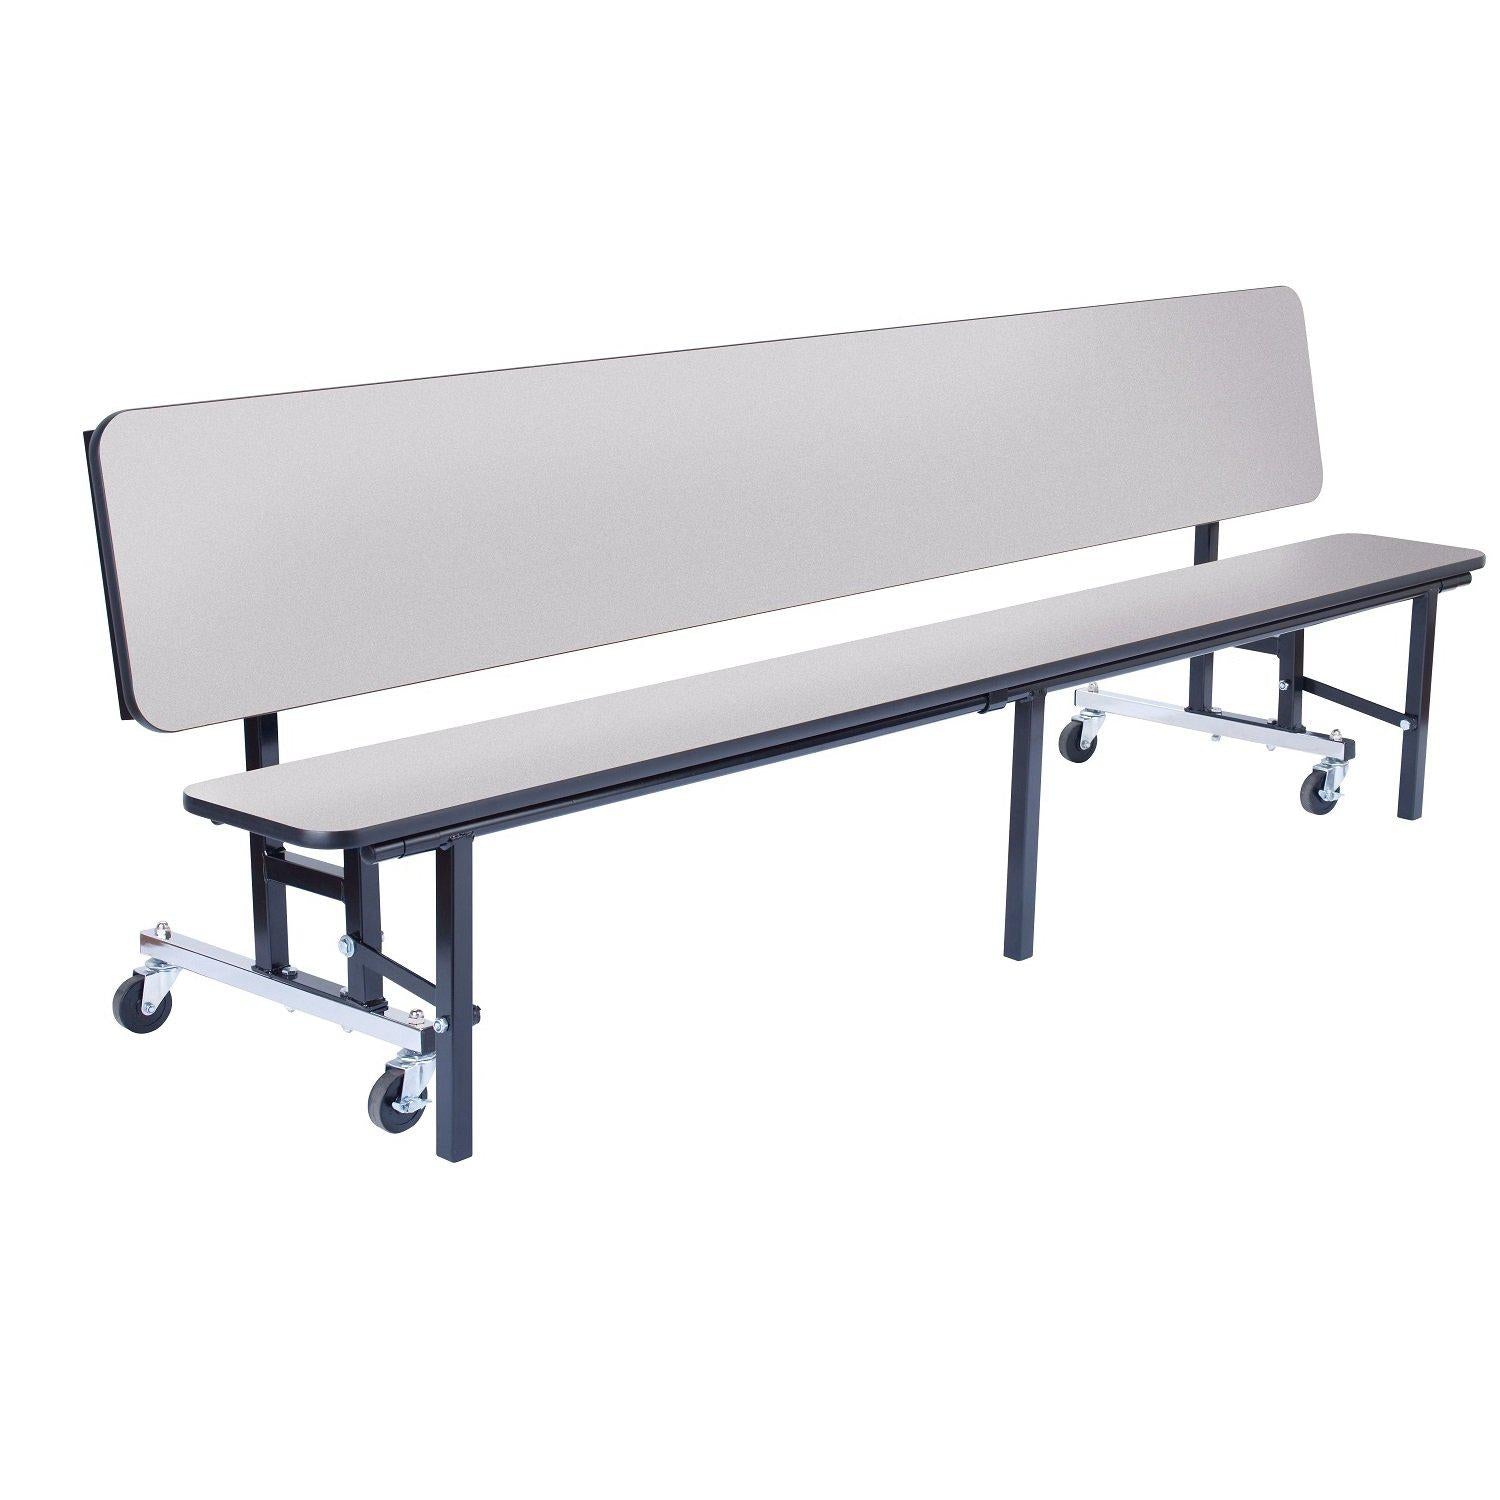 Mobile Convertible Bench Cafeteria Table, 7'L, Particleboard Core, Vinyl T-Mold Edge, Textured Black Frame